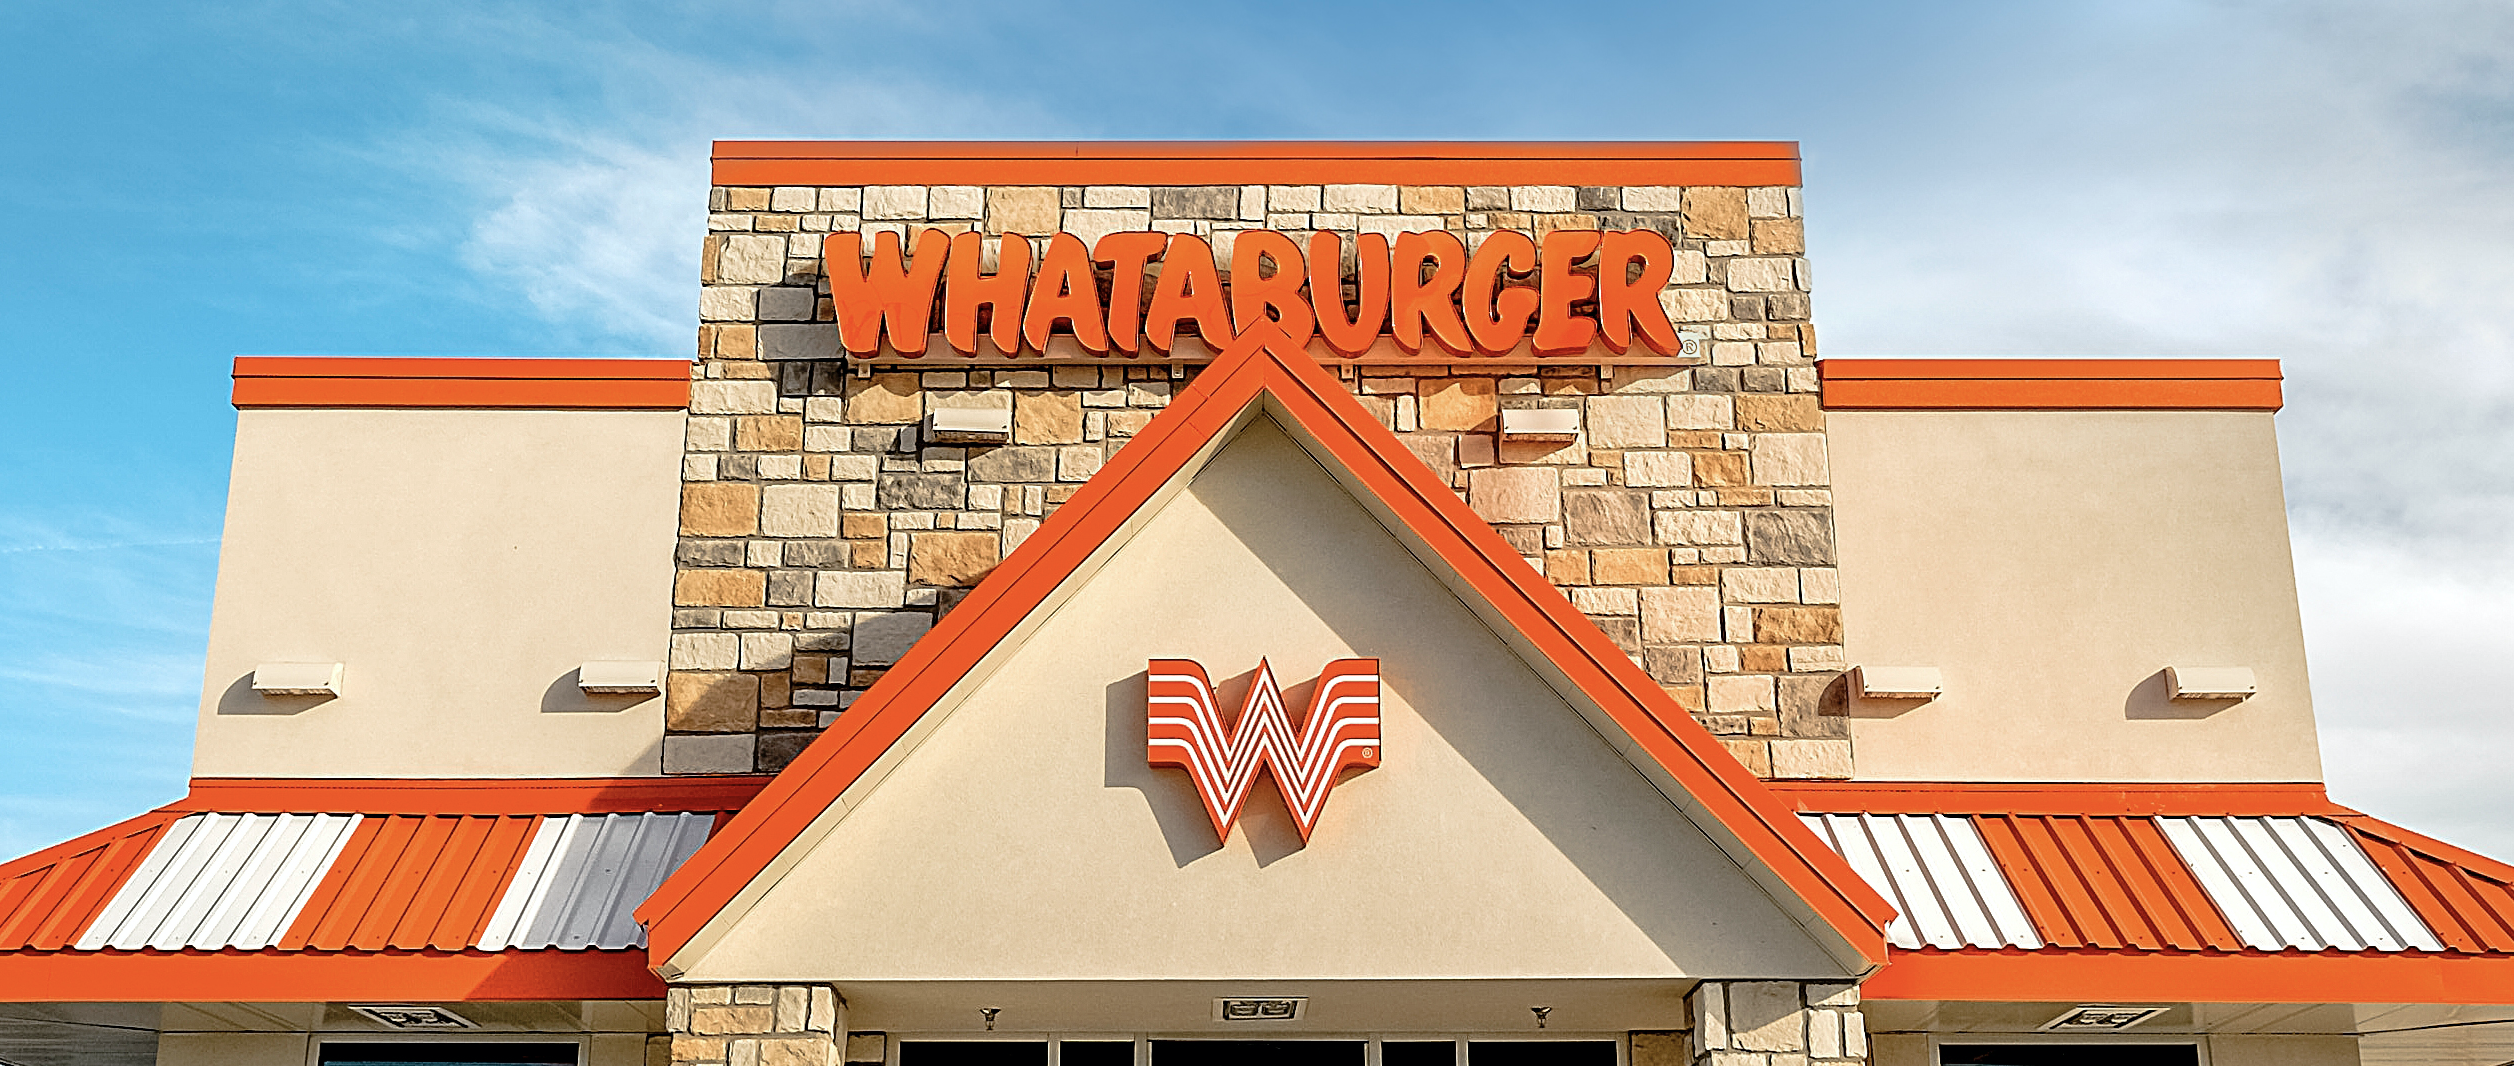 Does Whataburger Serve Breakfast All Day?